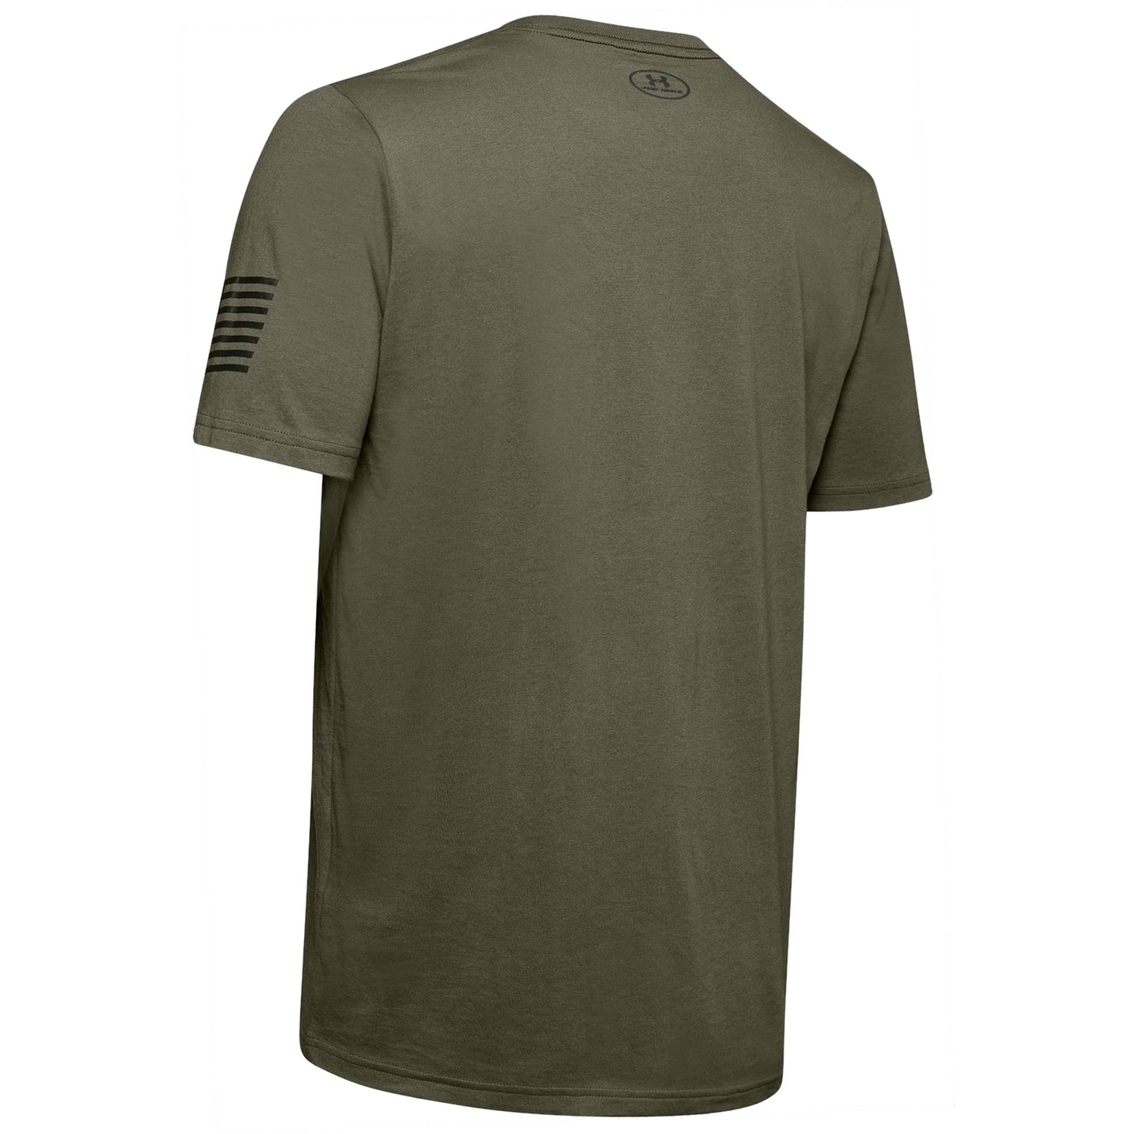 Under Armour Freedom USA Tee - Image 6 of 6